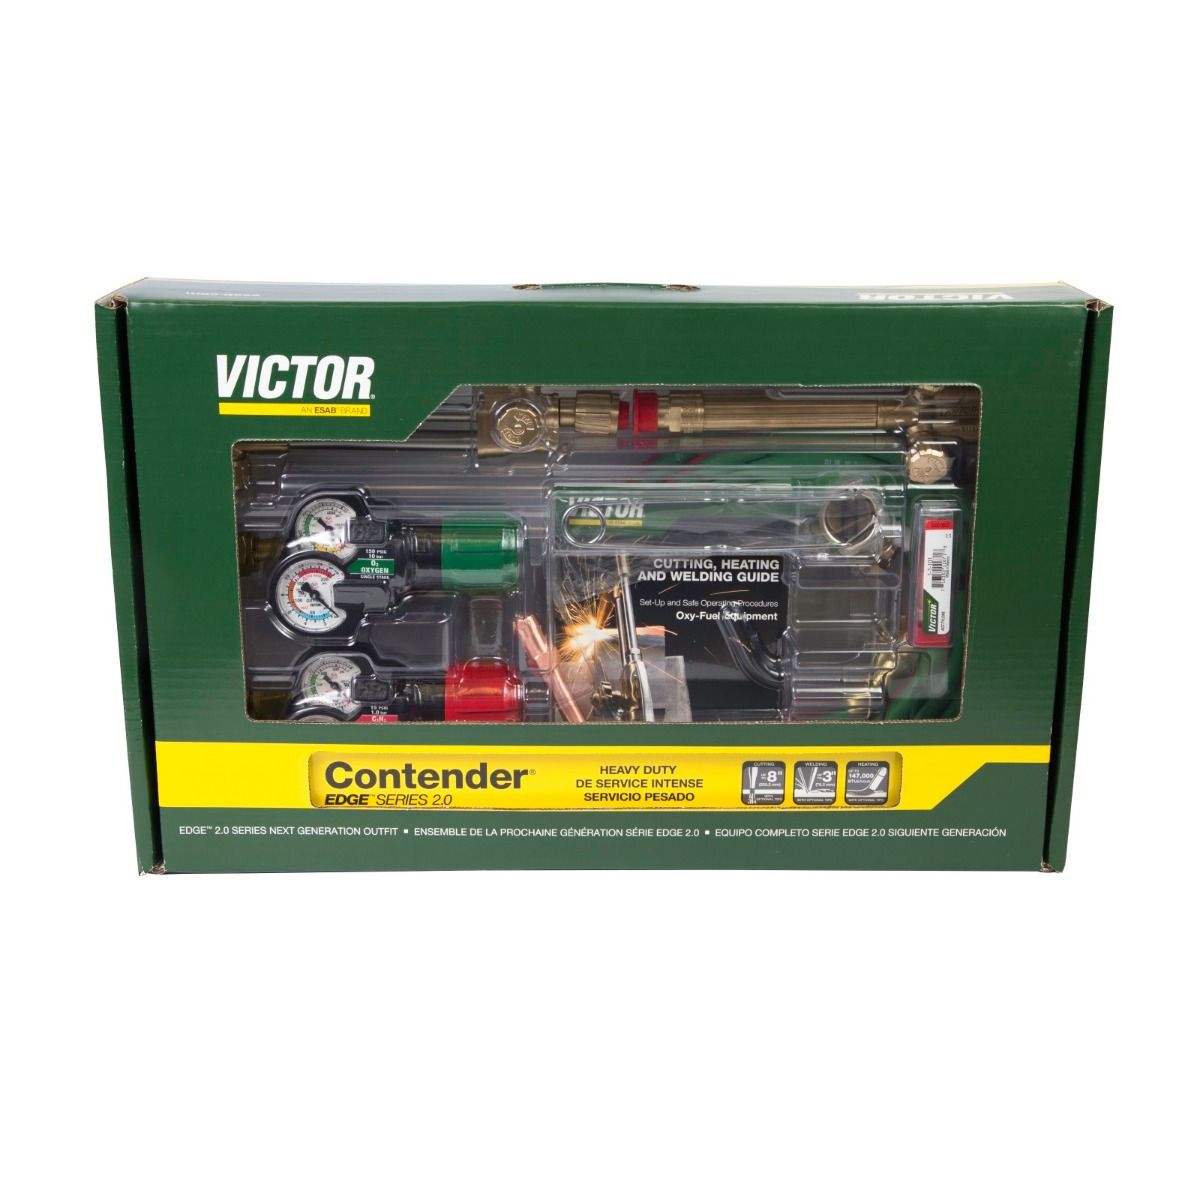 Victor Contender 540/300 Edge 2.0 Heavy Duty Outfit - 0384-2131